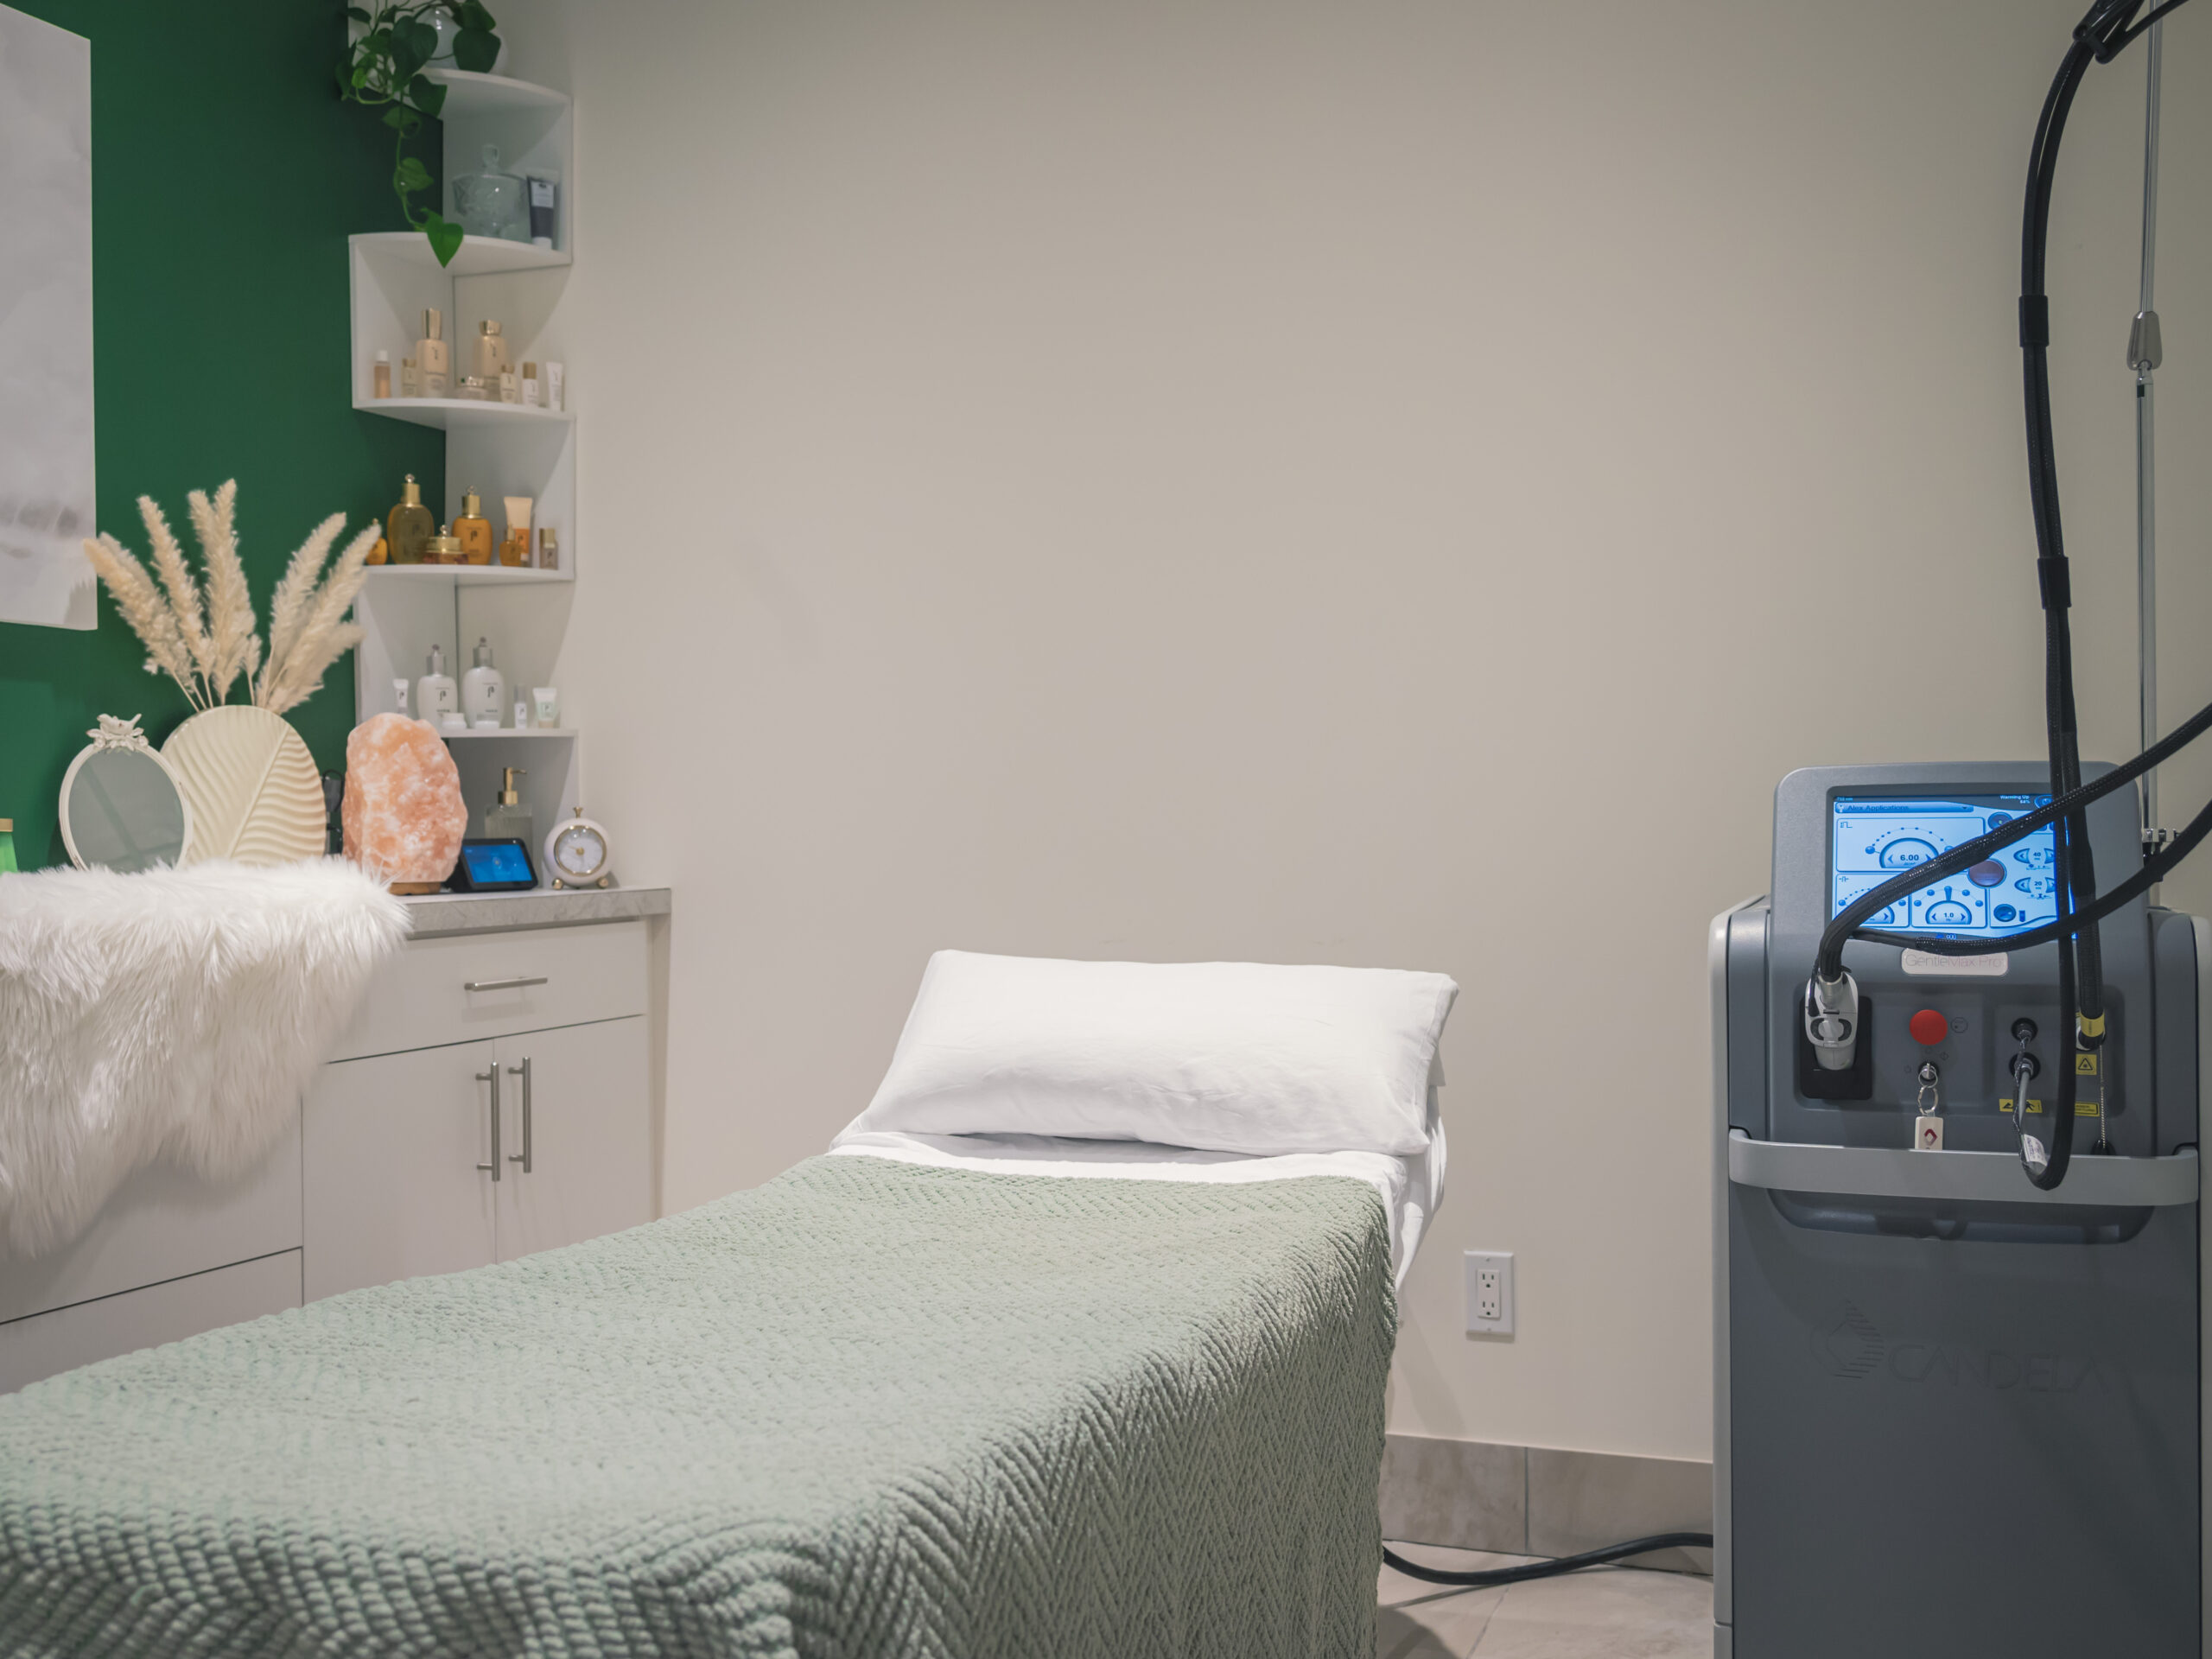 An image of a room with a single medical bed with a green blanket. to the right is the laser system used for hair removal